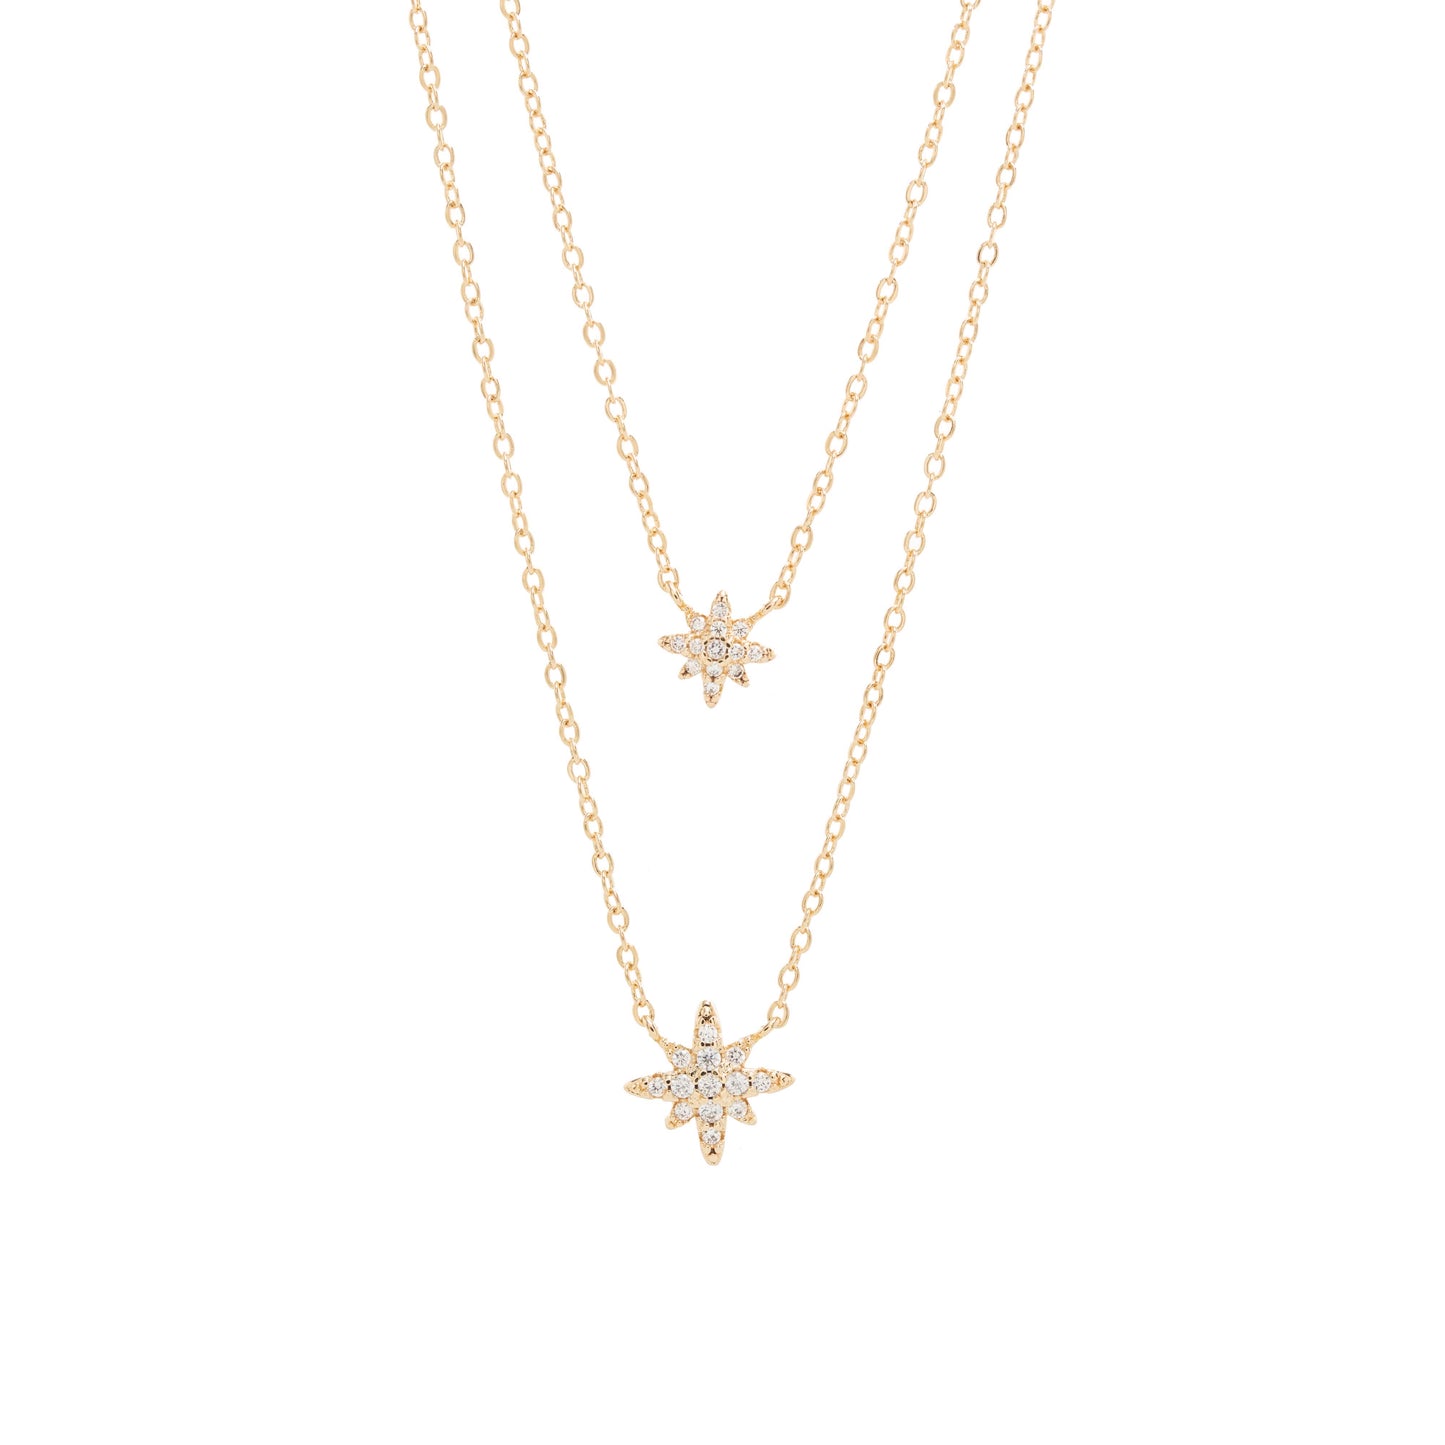 Two Layers with 8 Points Star Necklace